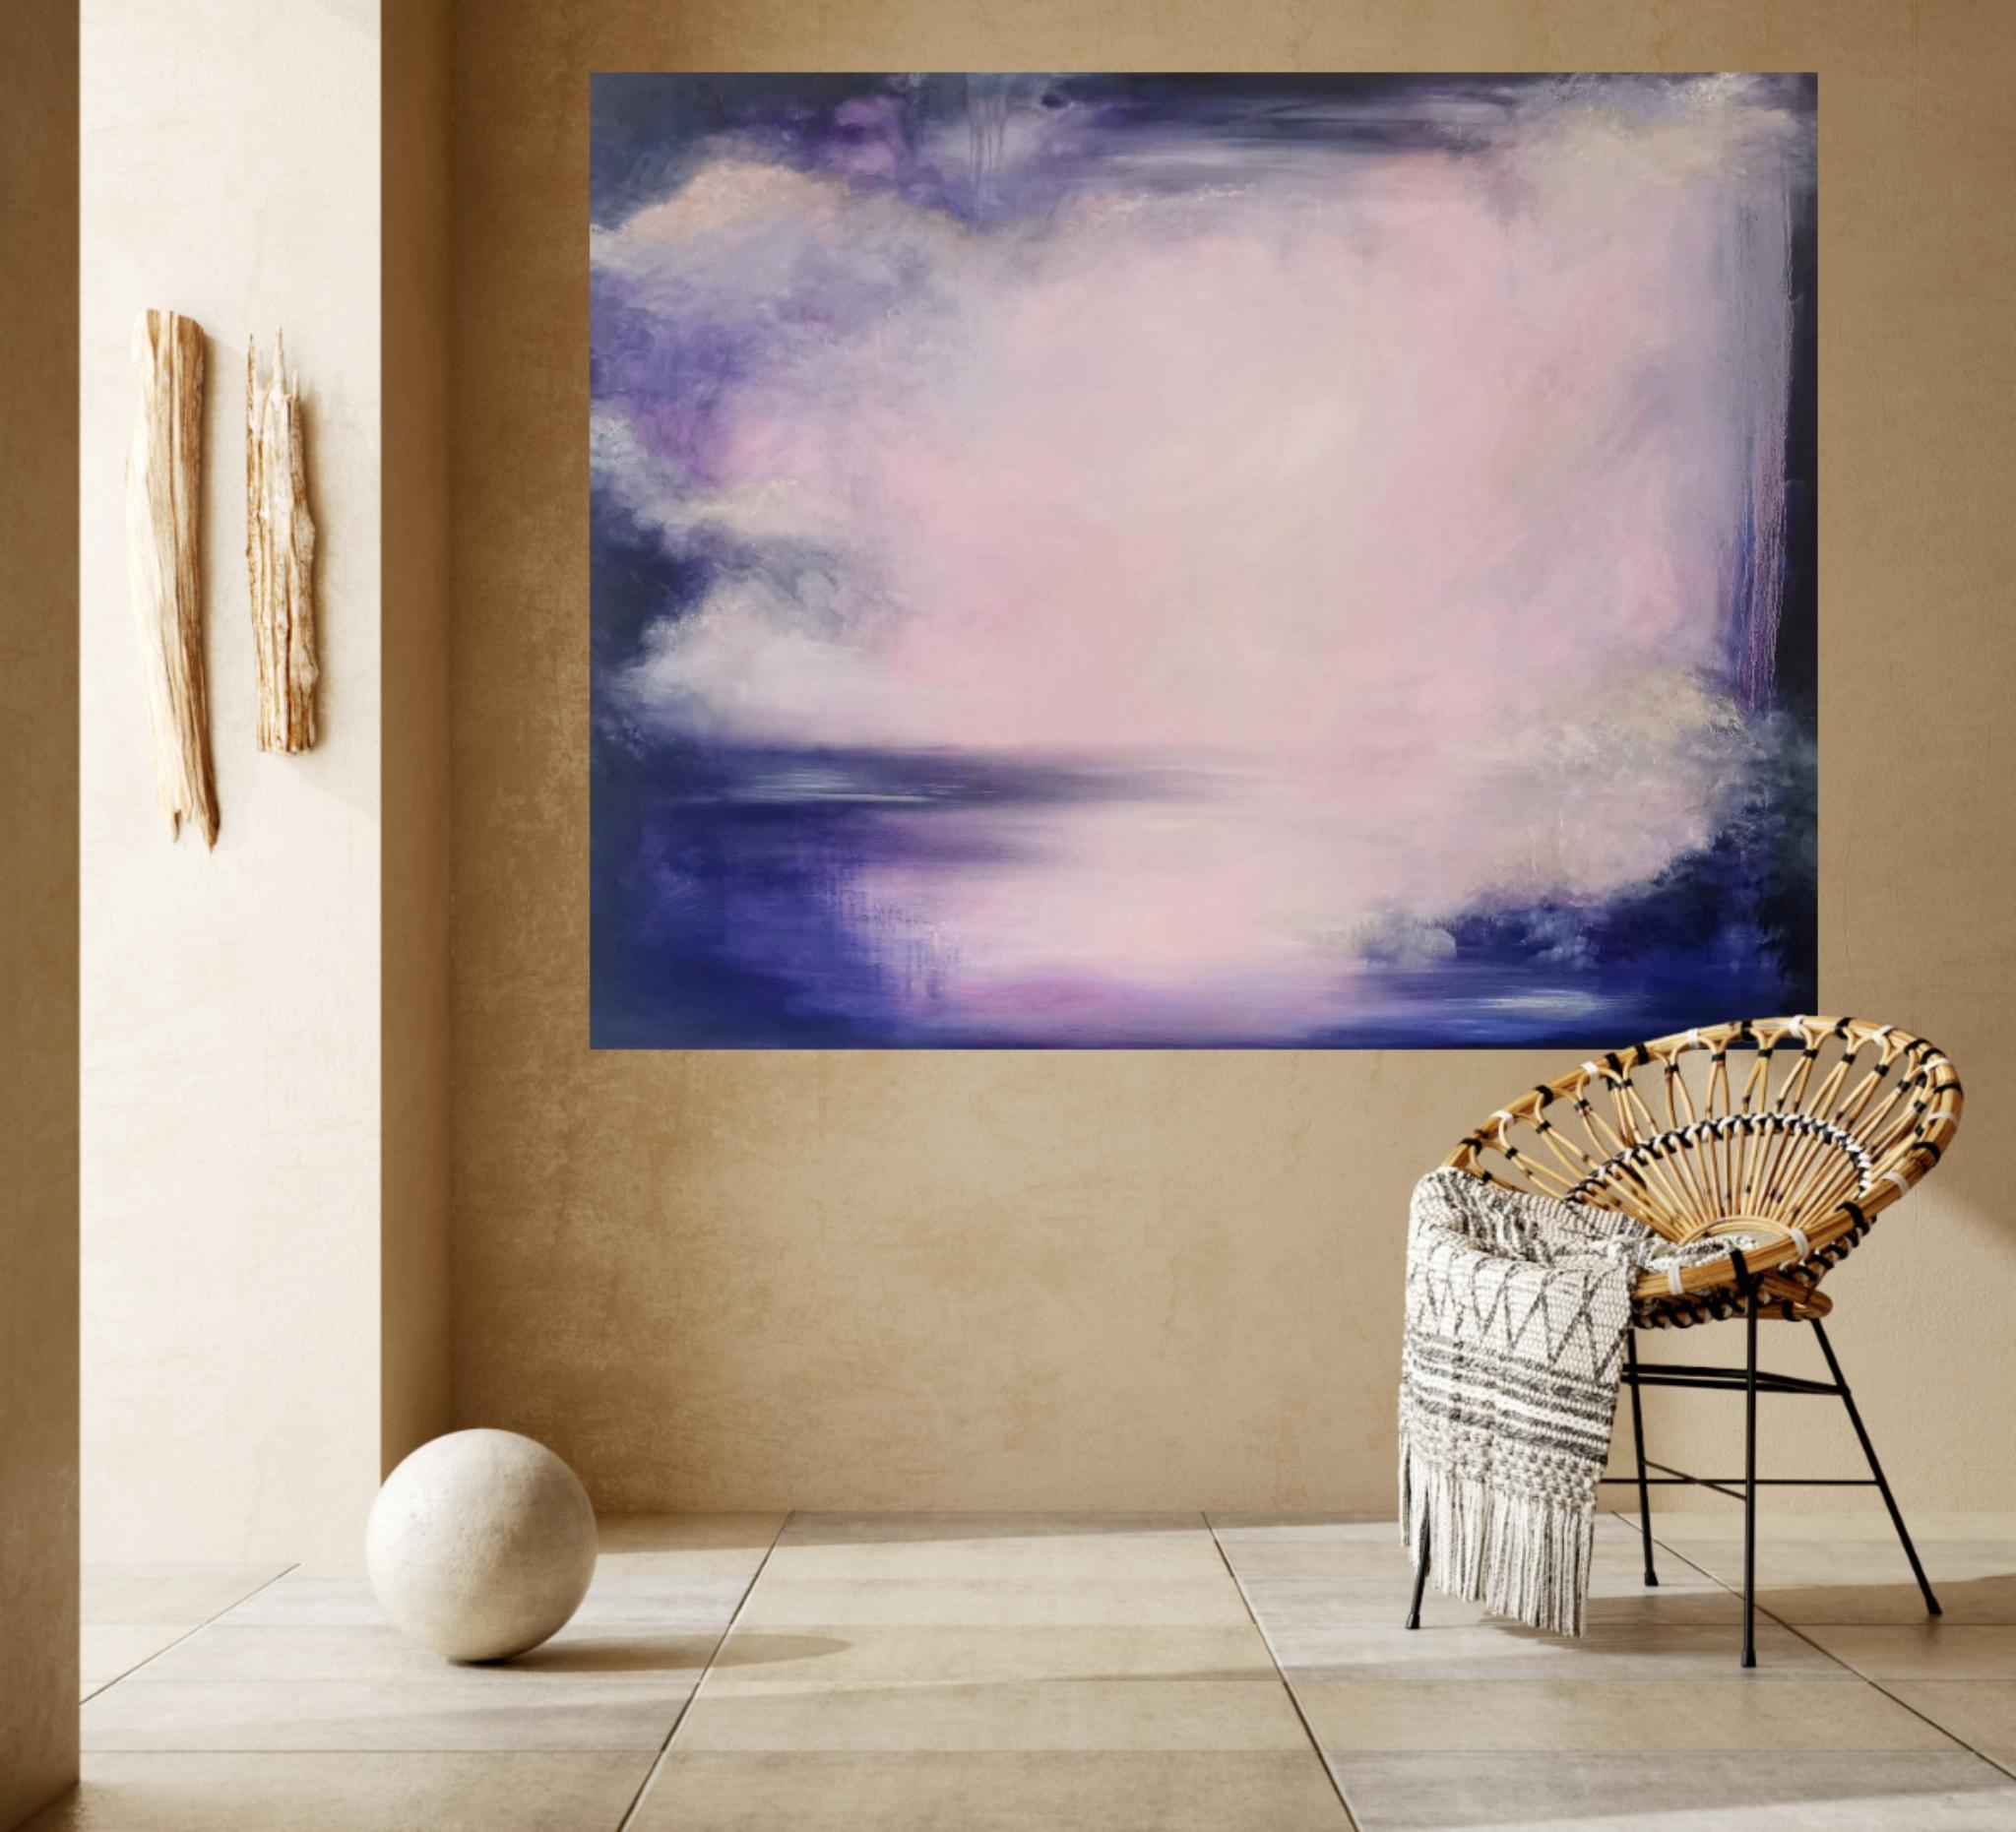 Violet night of the soul - Large violet abstract landscape painting 3